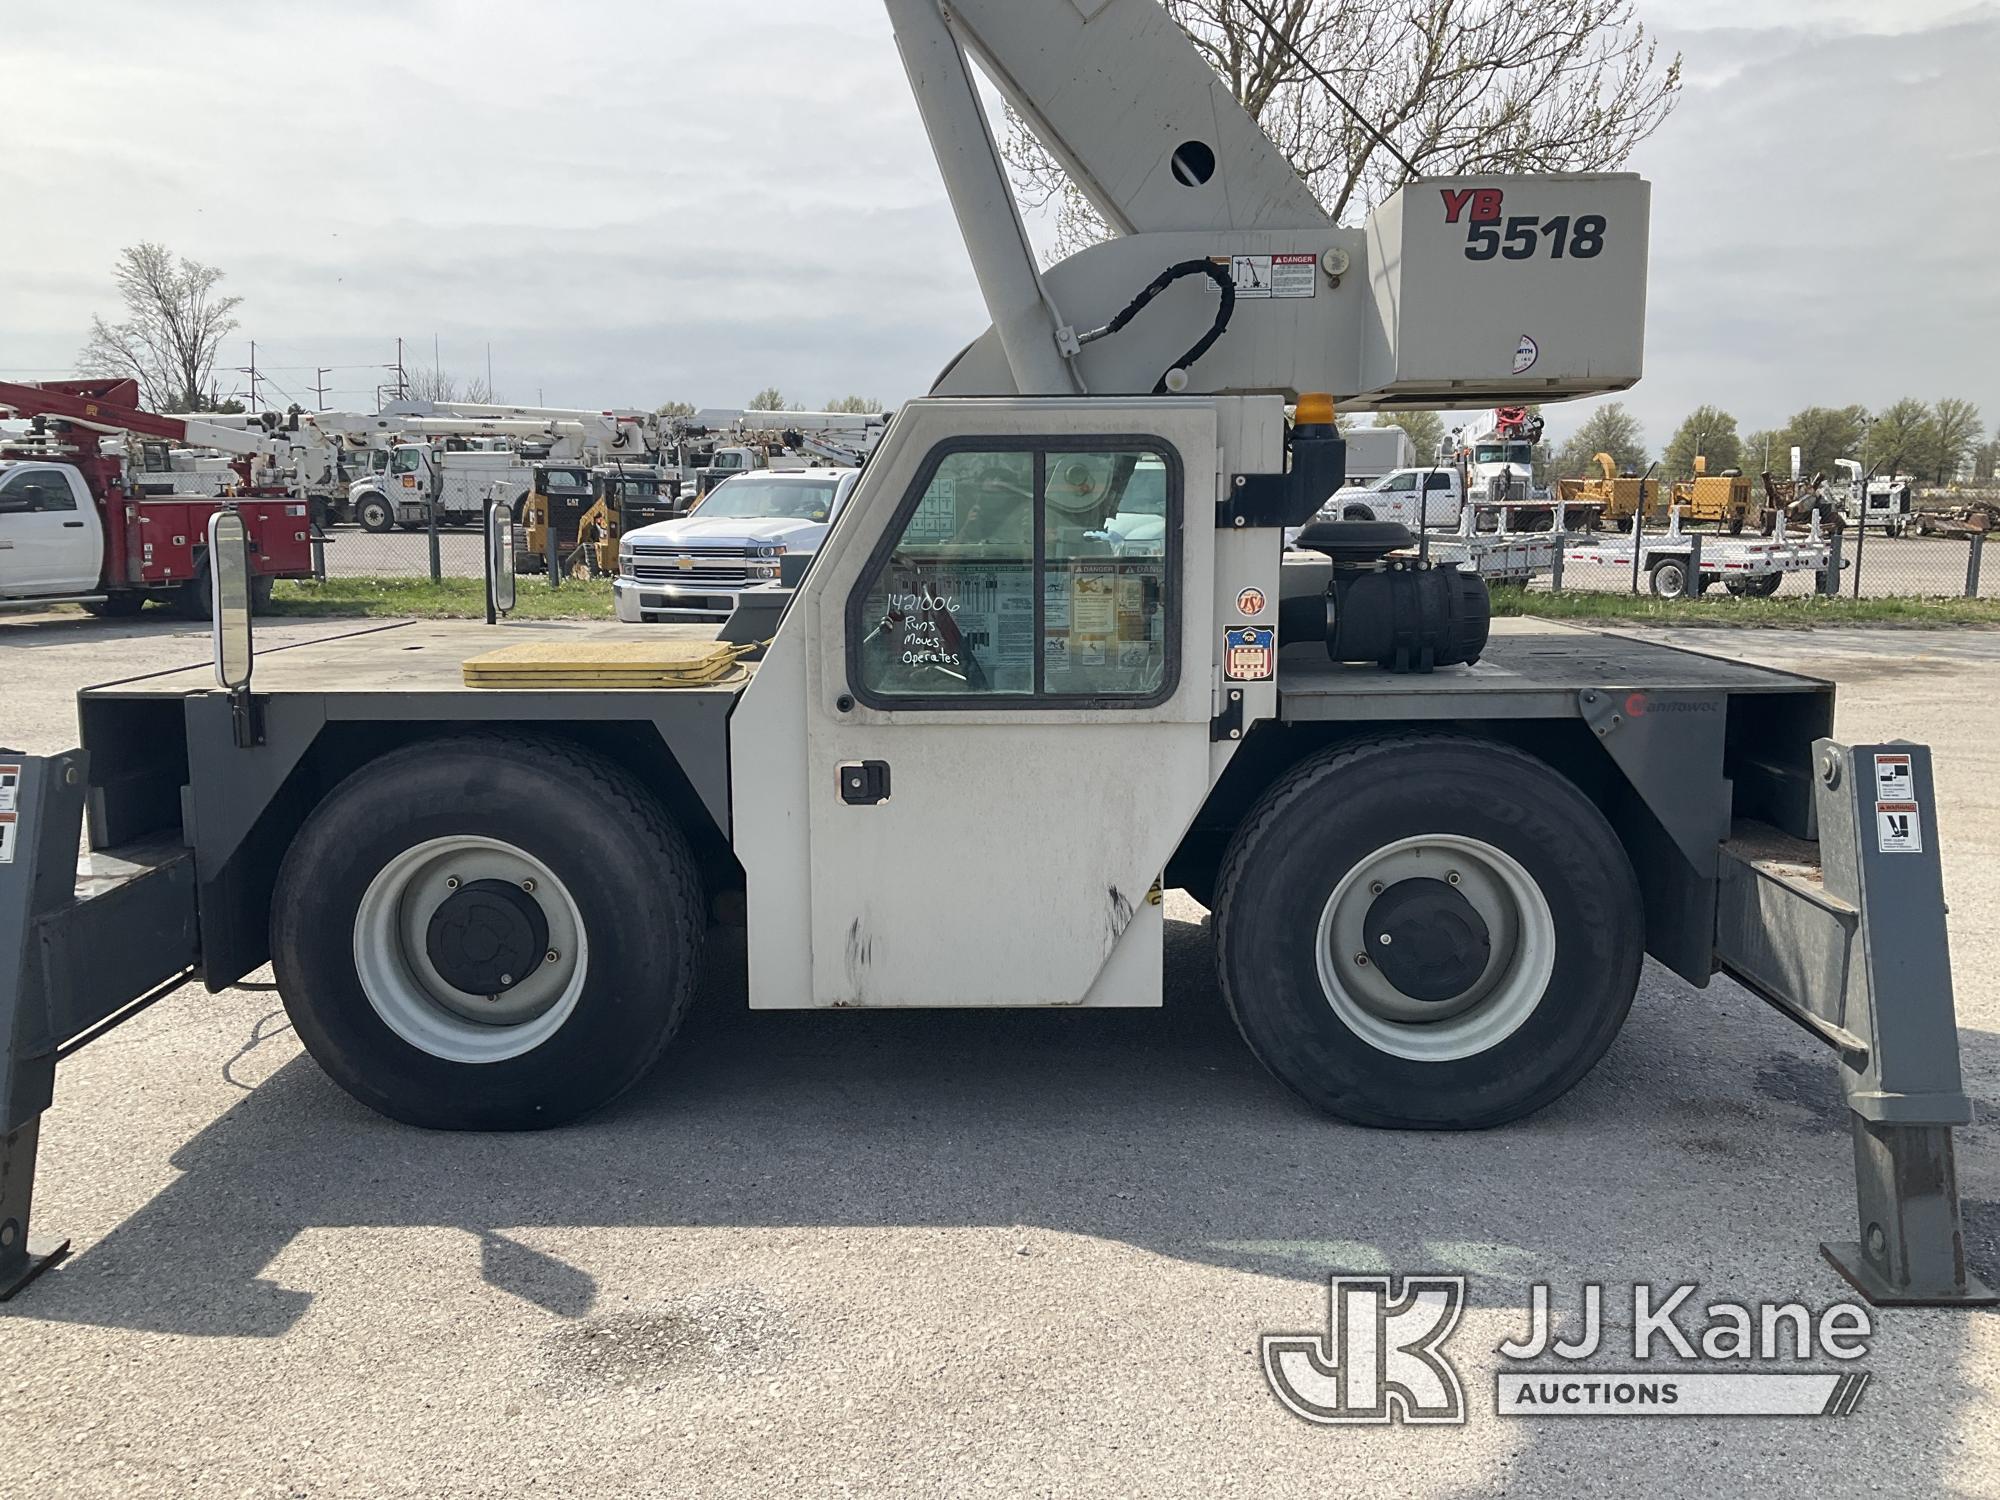 (Kansas City, MO) 2012 Grove YB5518 Carry Deck Crane Runs, Moves, & Operates) (Buyer Will Have To Ge